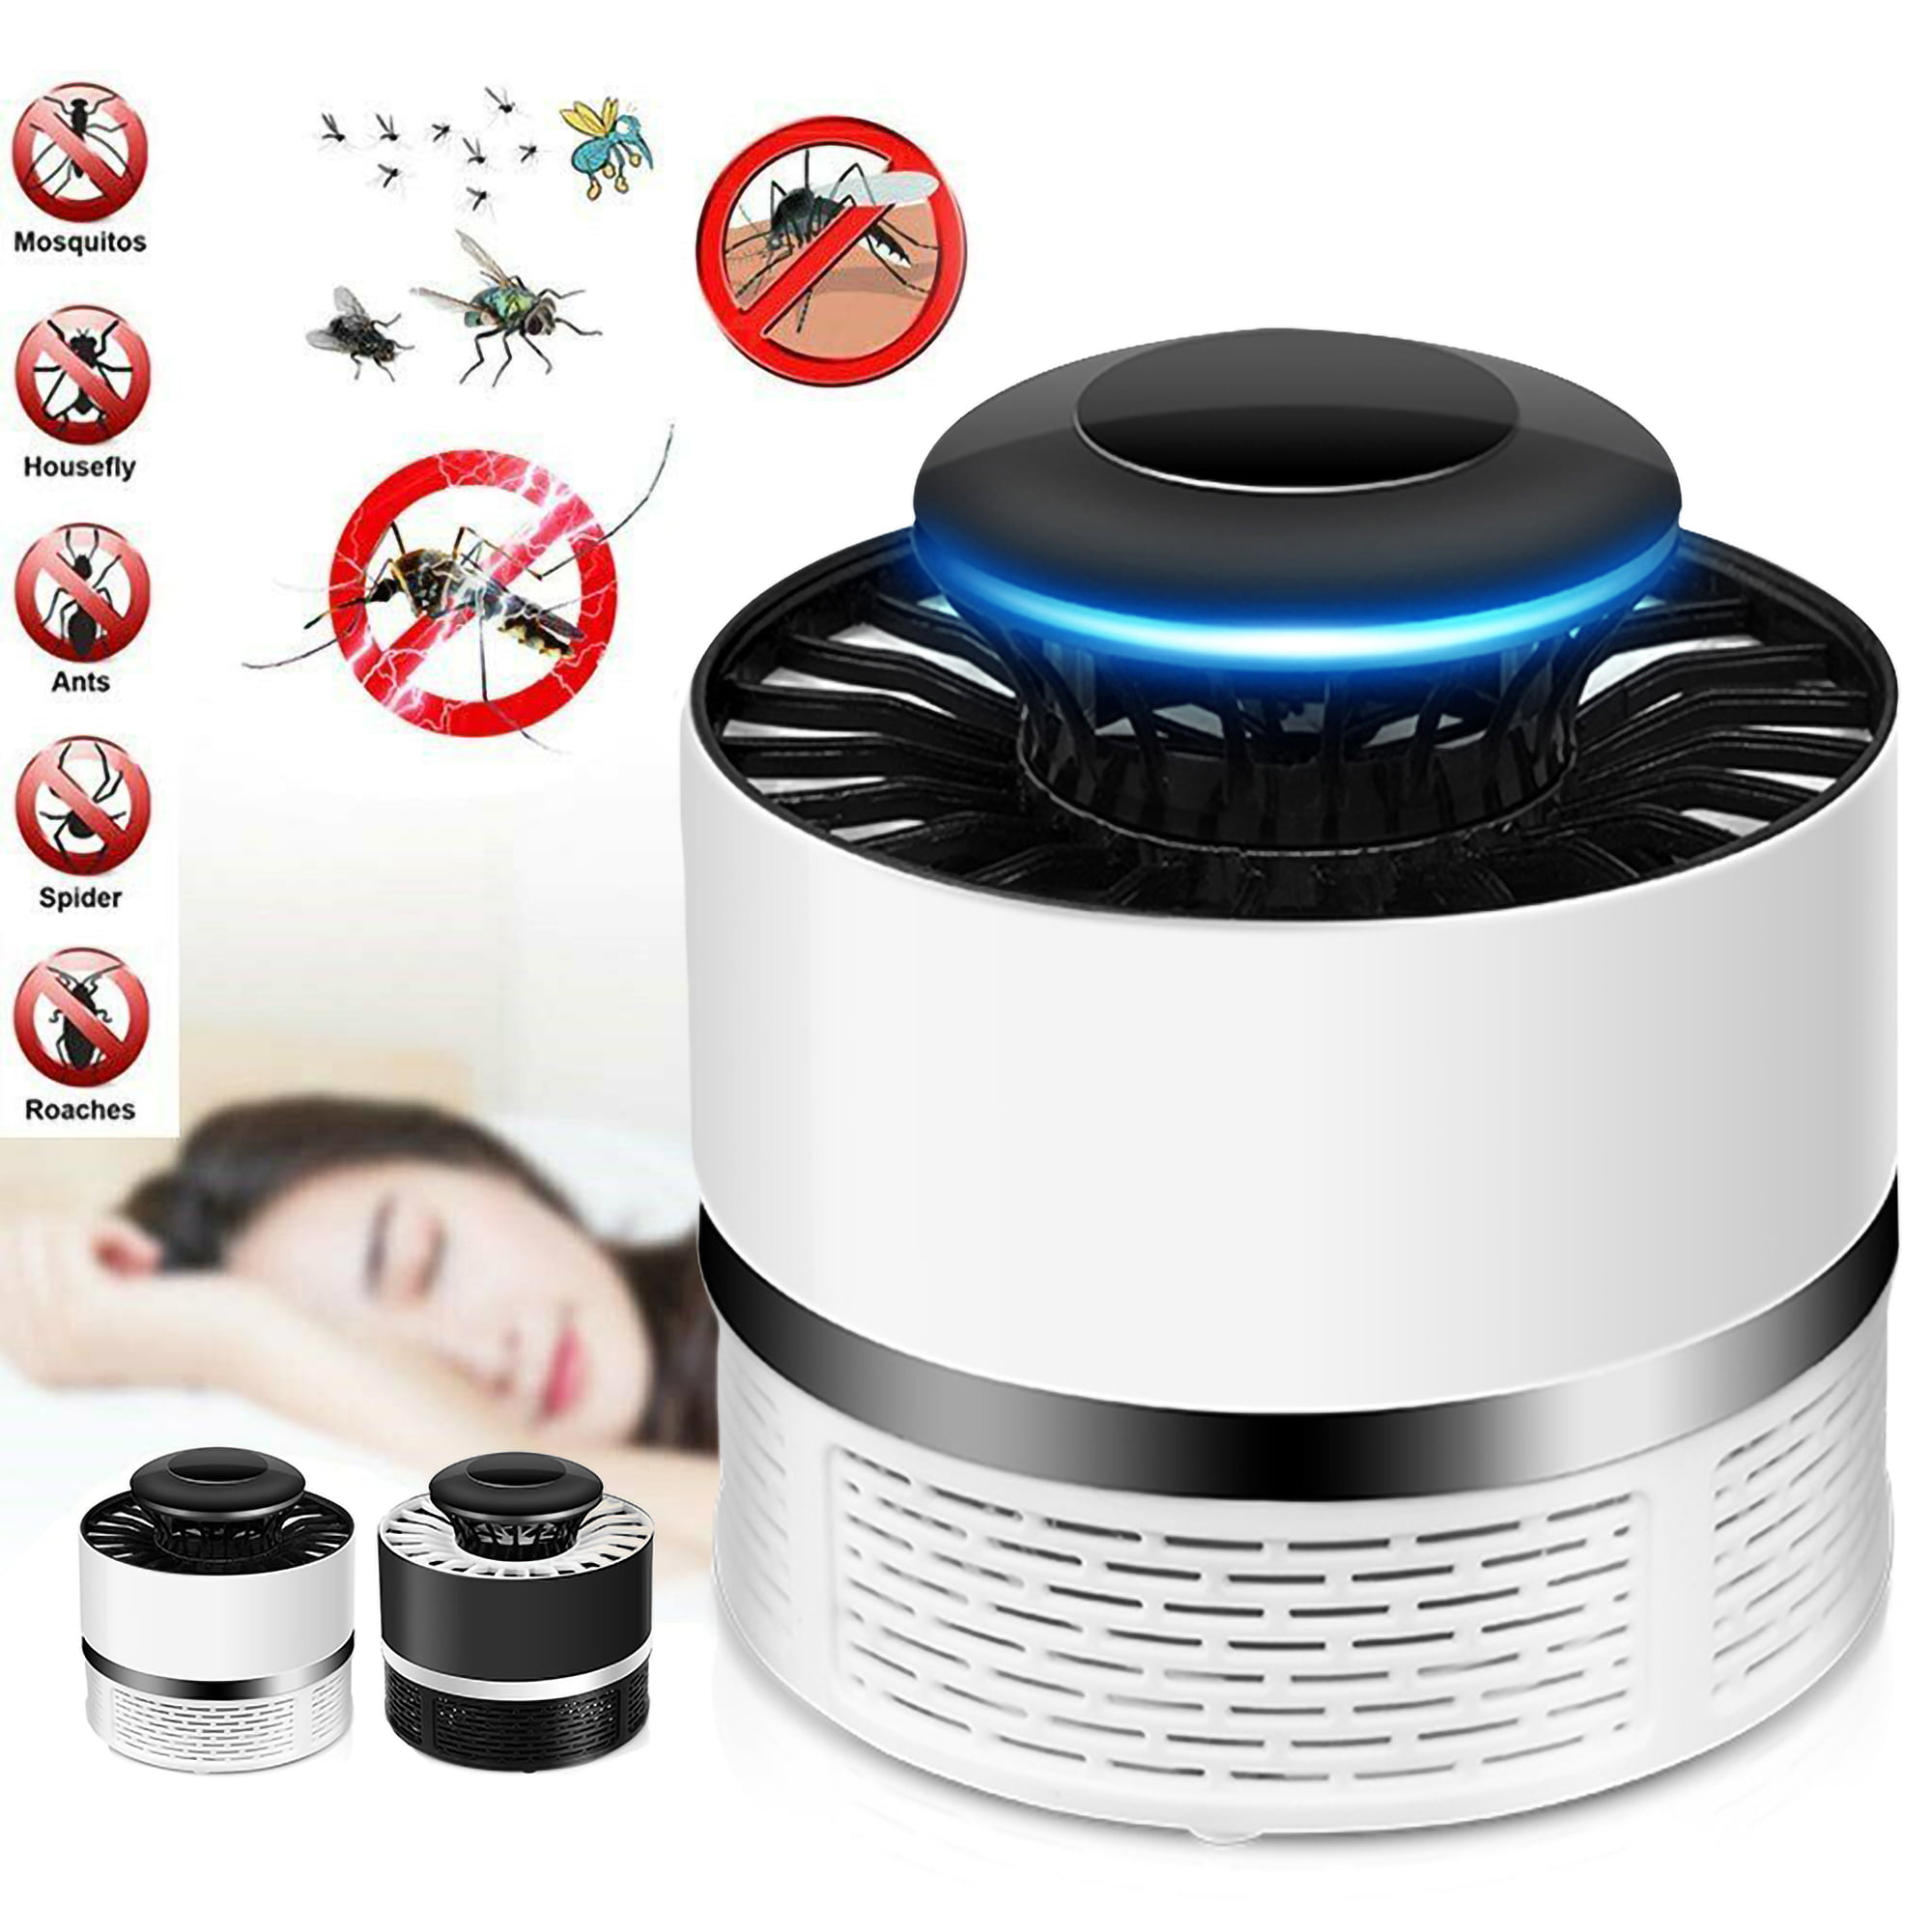 Details about   USB Photocatalytic Mosquito Killer Home Mosquito Repellent LED Mosquito Trap New 